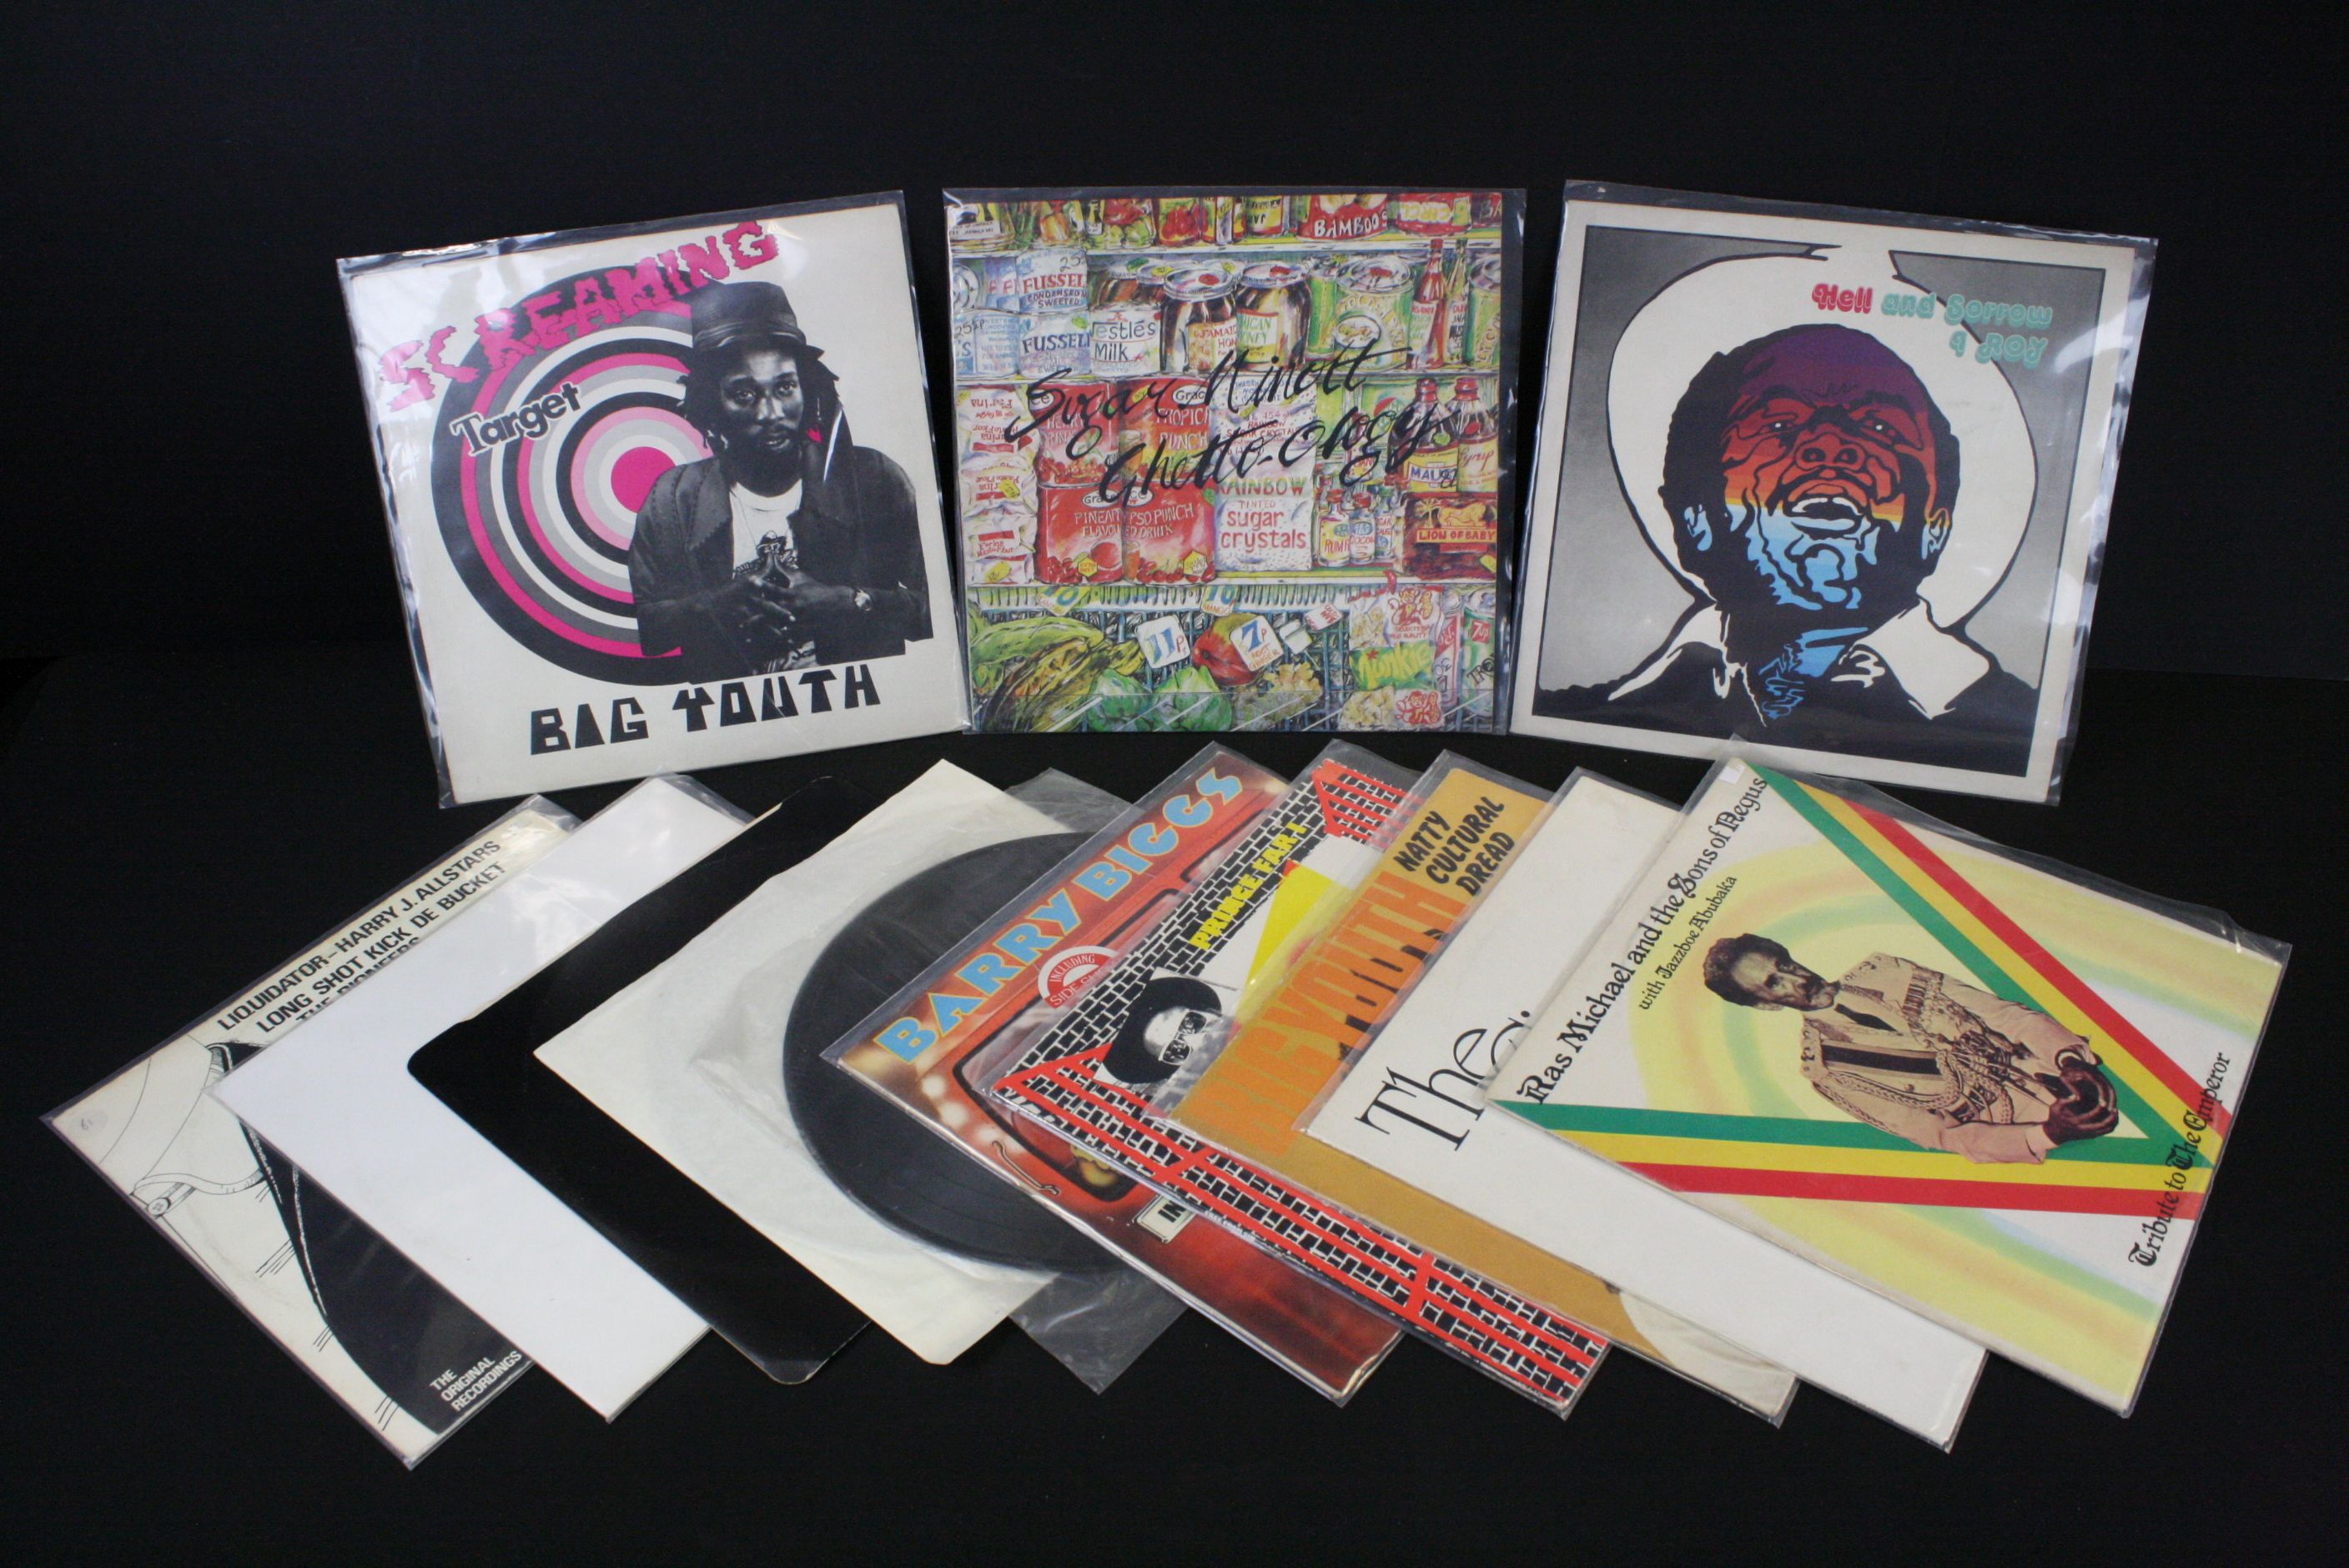 Vinyl - Trojan Records, 11 Original UK albums and two 12” Reggae / Roots, from the 1970s and